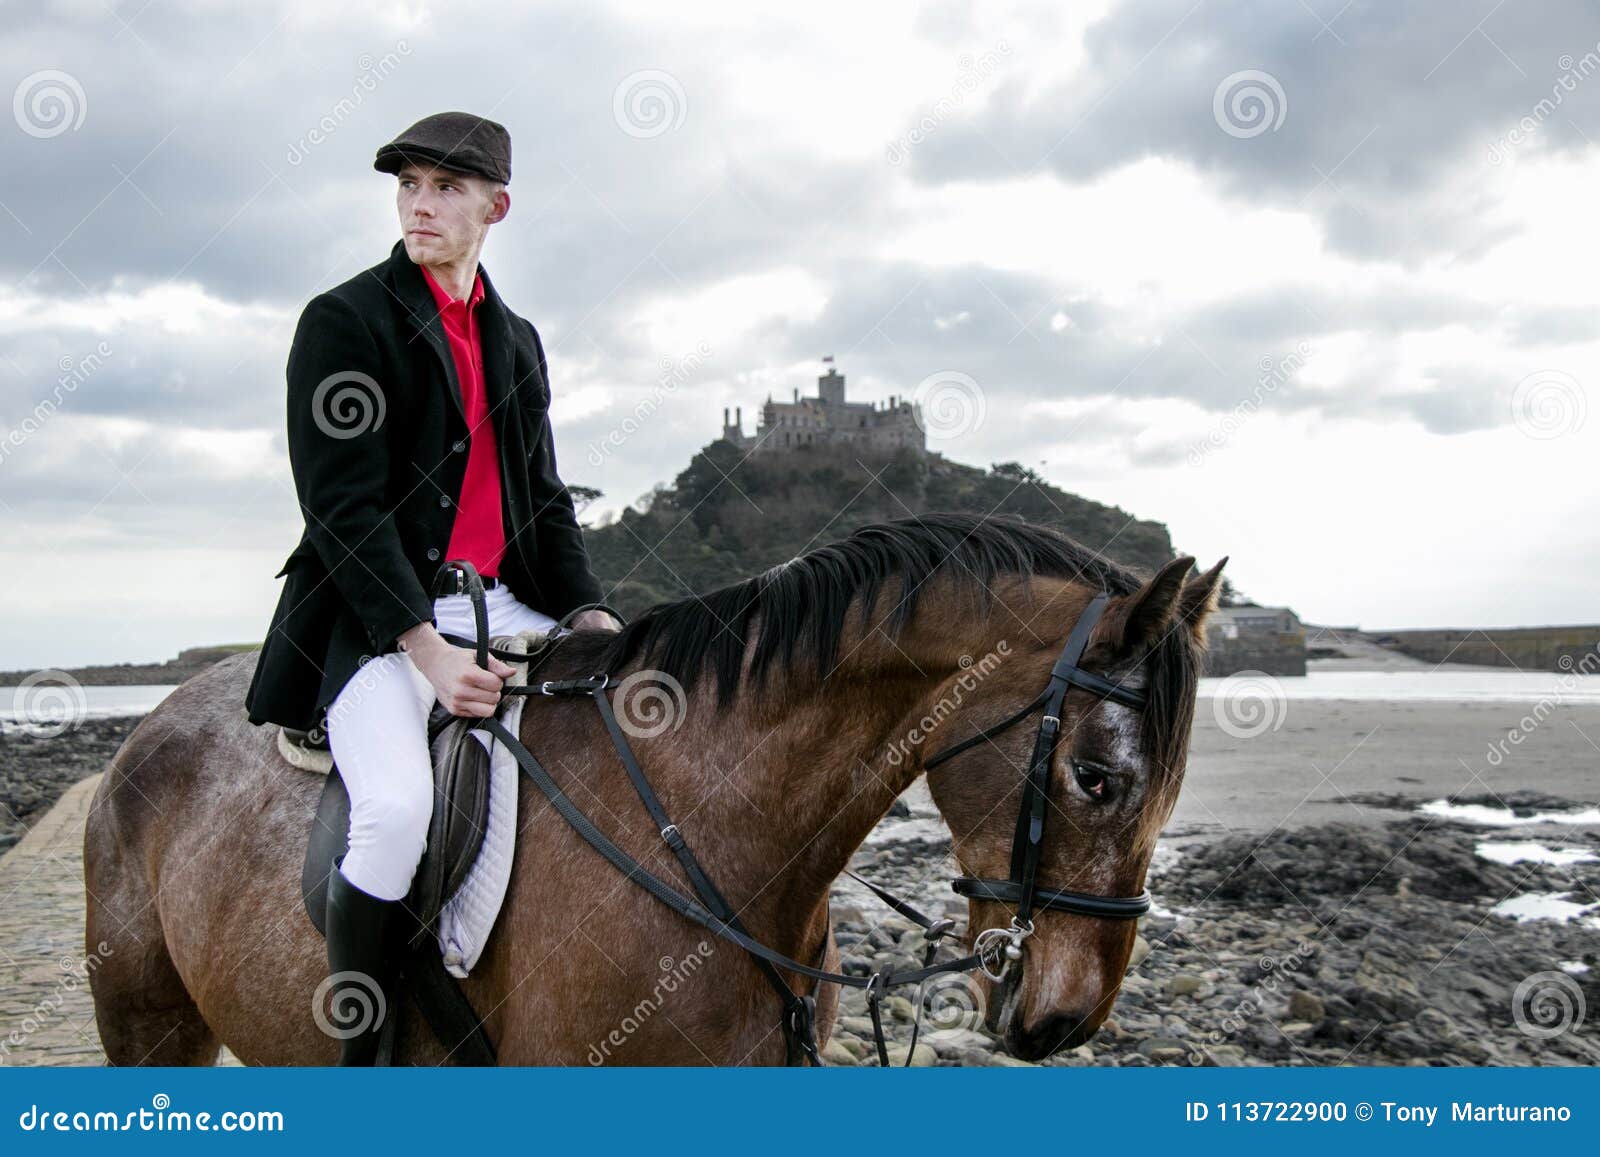 Handsome Male Horse Rider Riding Horse on Beach in Traditional Fashion ...